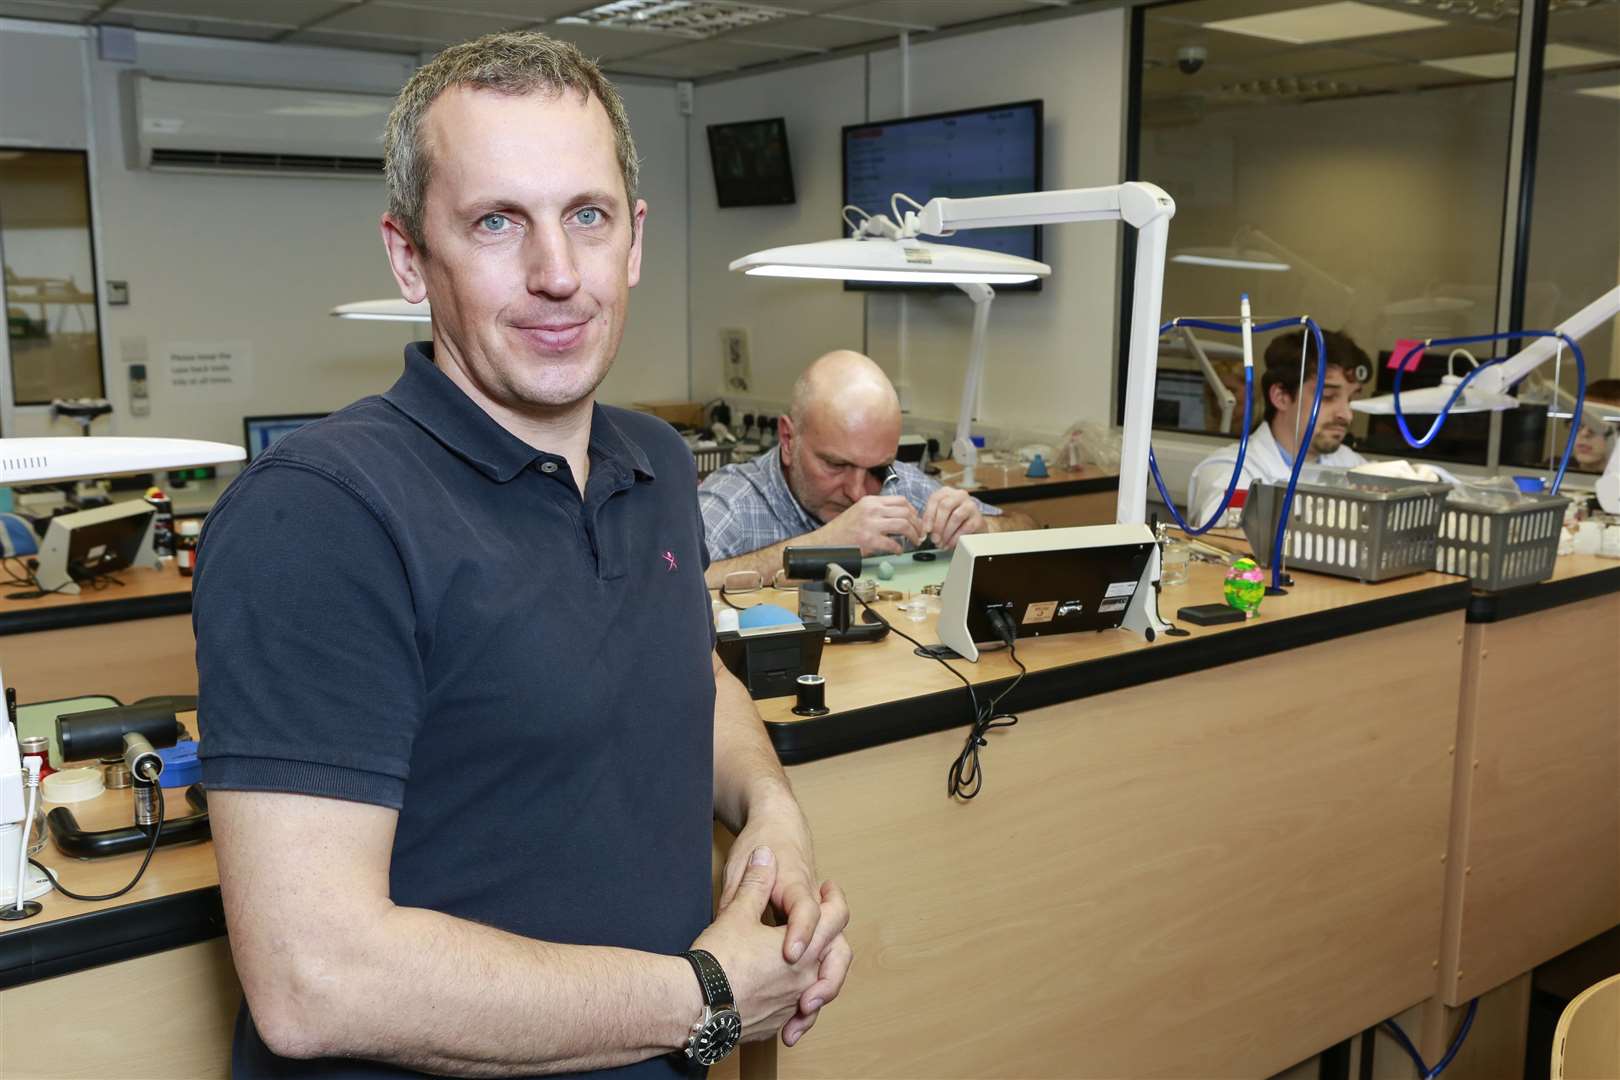 Watchfinder director Matt Bowling at its service and repair centre in Maidstone